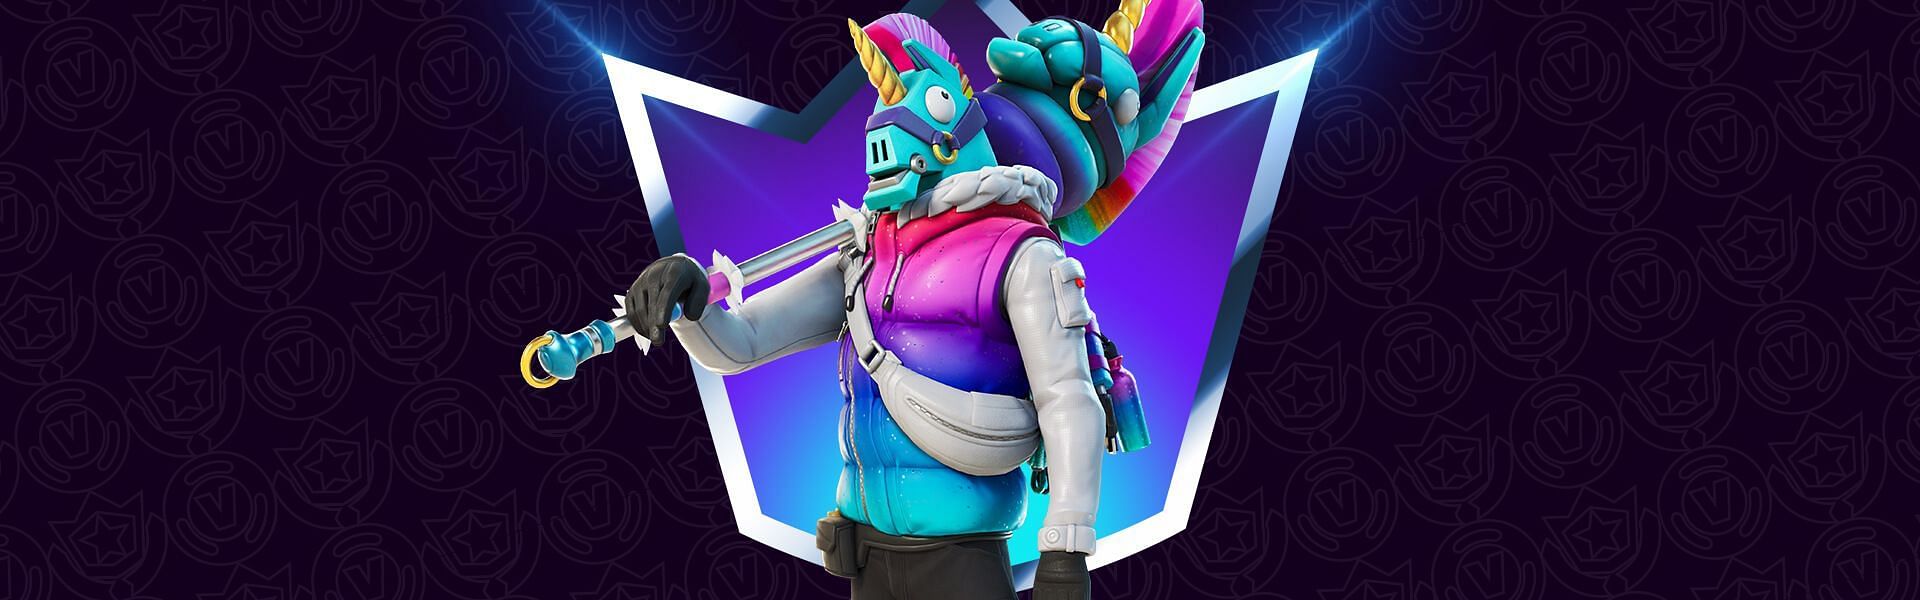 Llambro is another disappointing Fortnite Crew skin. (Image via Epic Games)